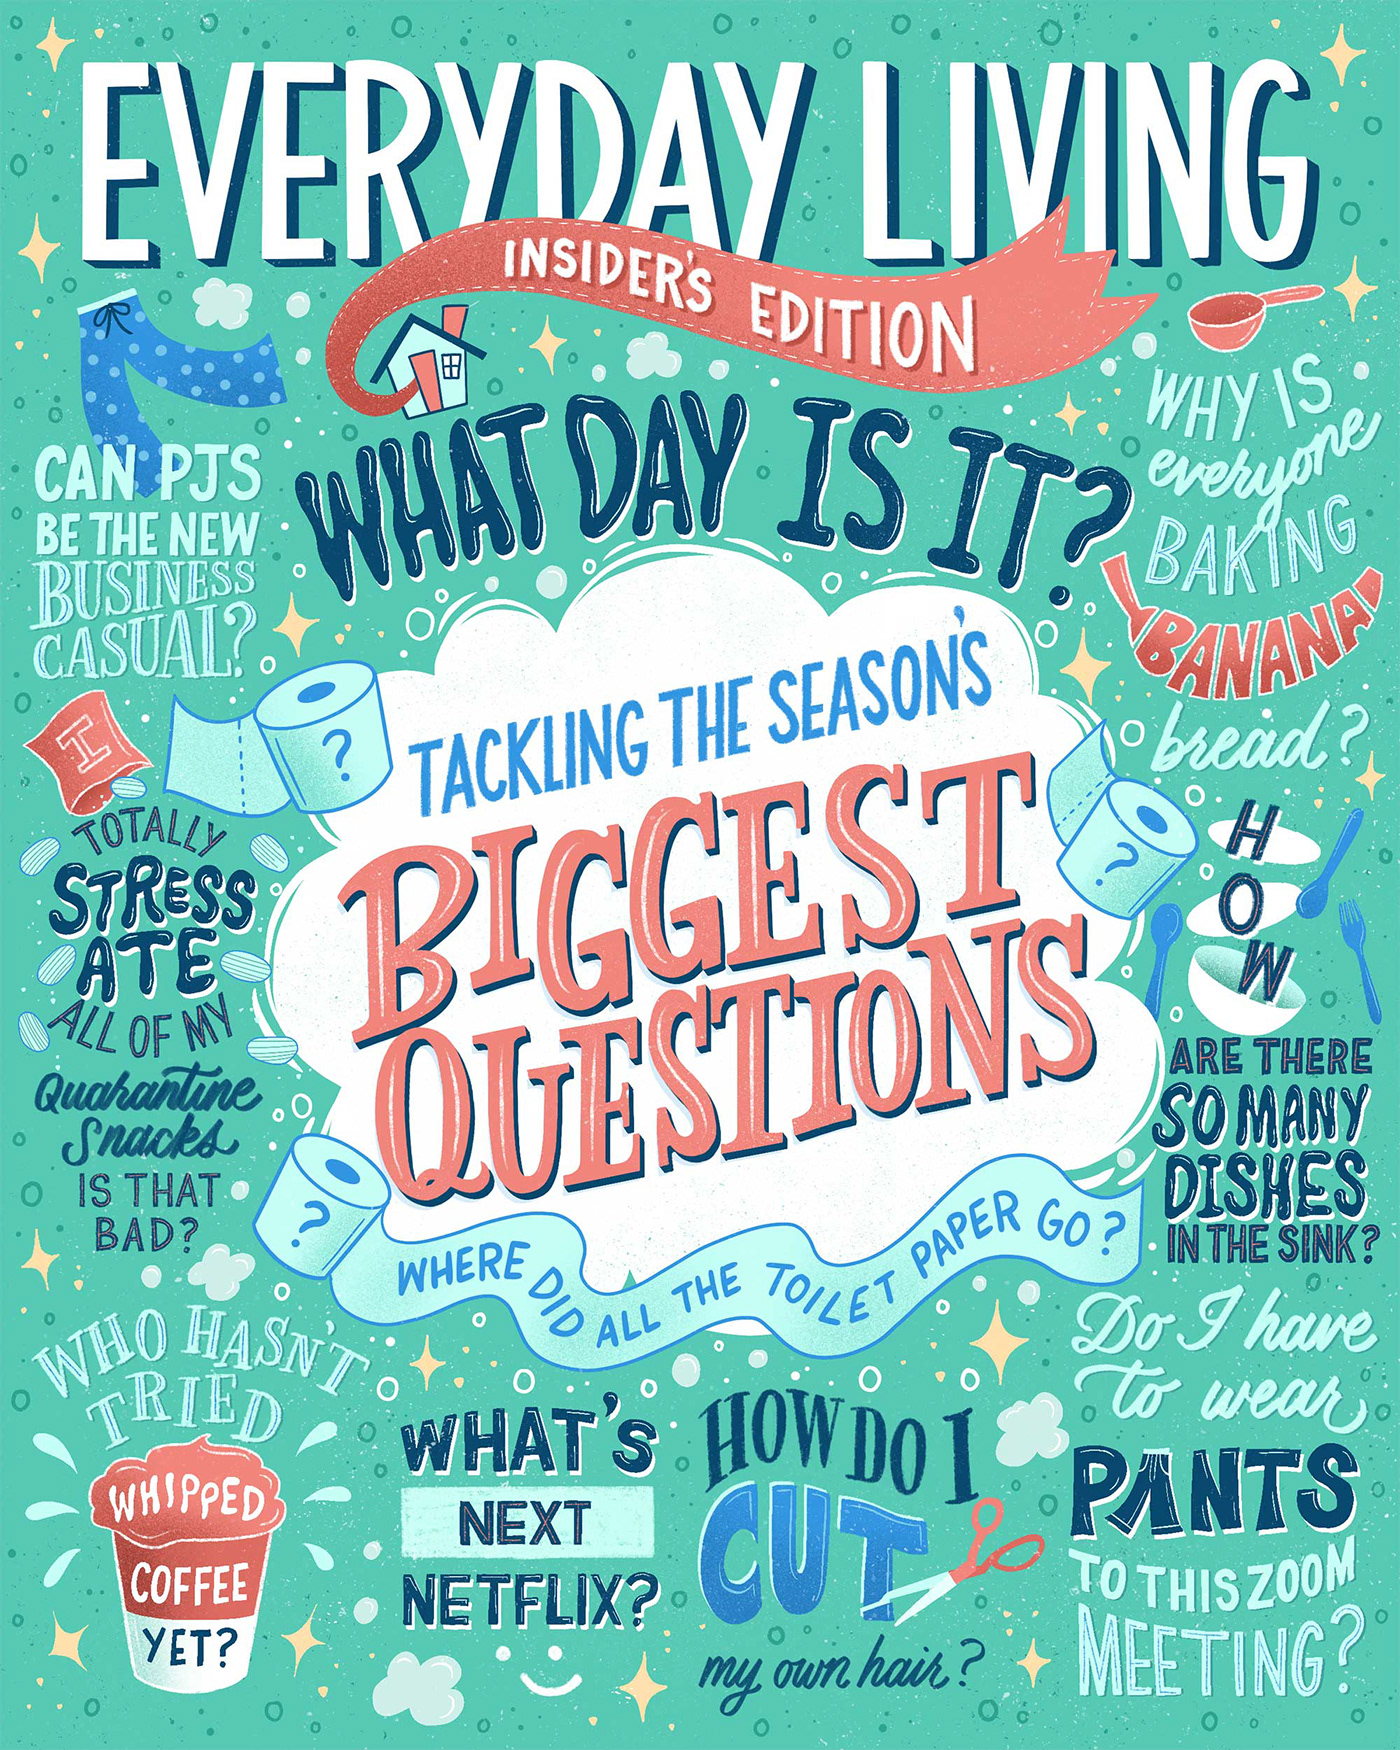 Magazine cover concept featuring hand lettered phrases playing off common quarantine situations